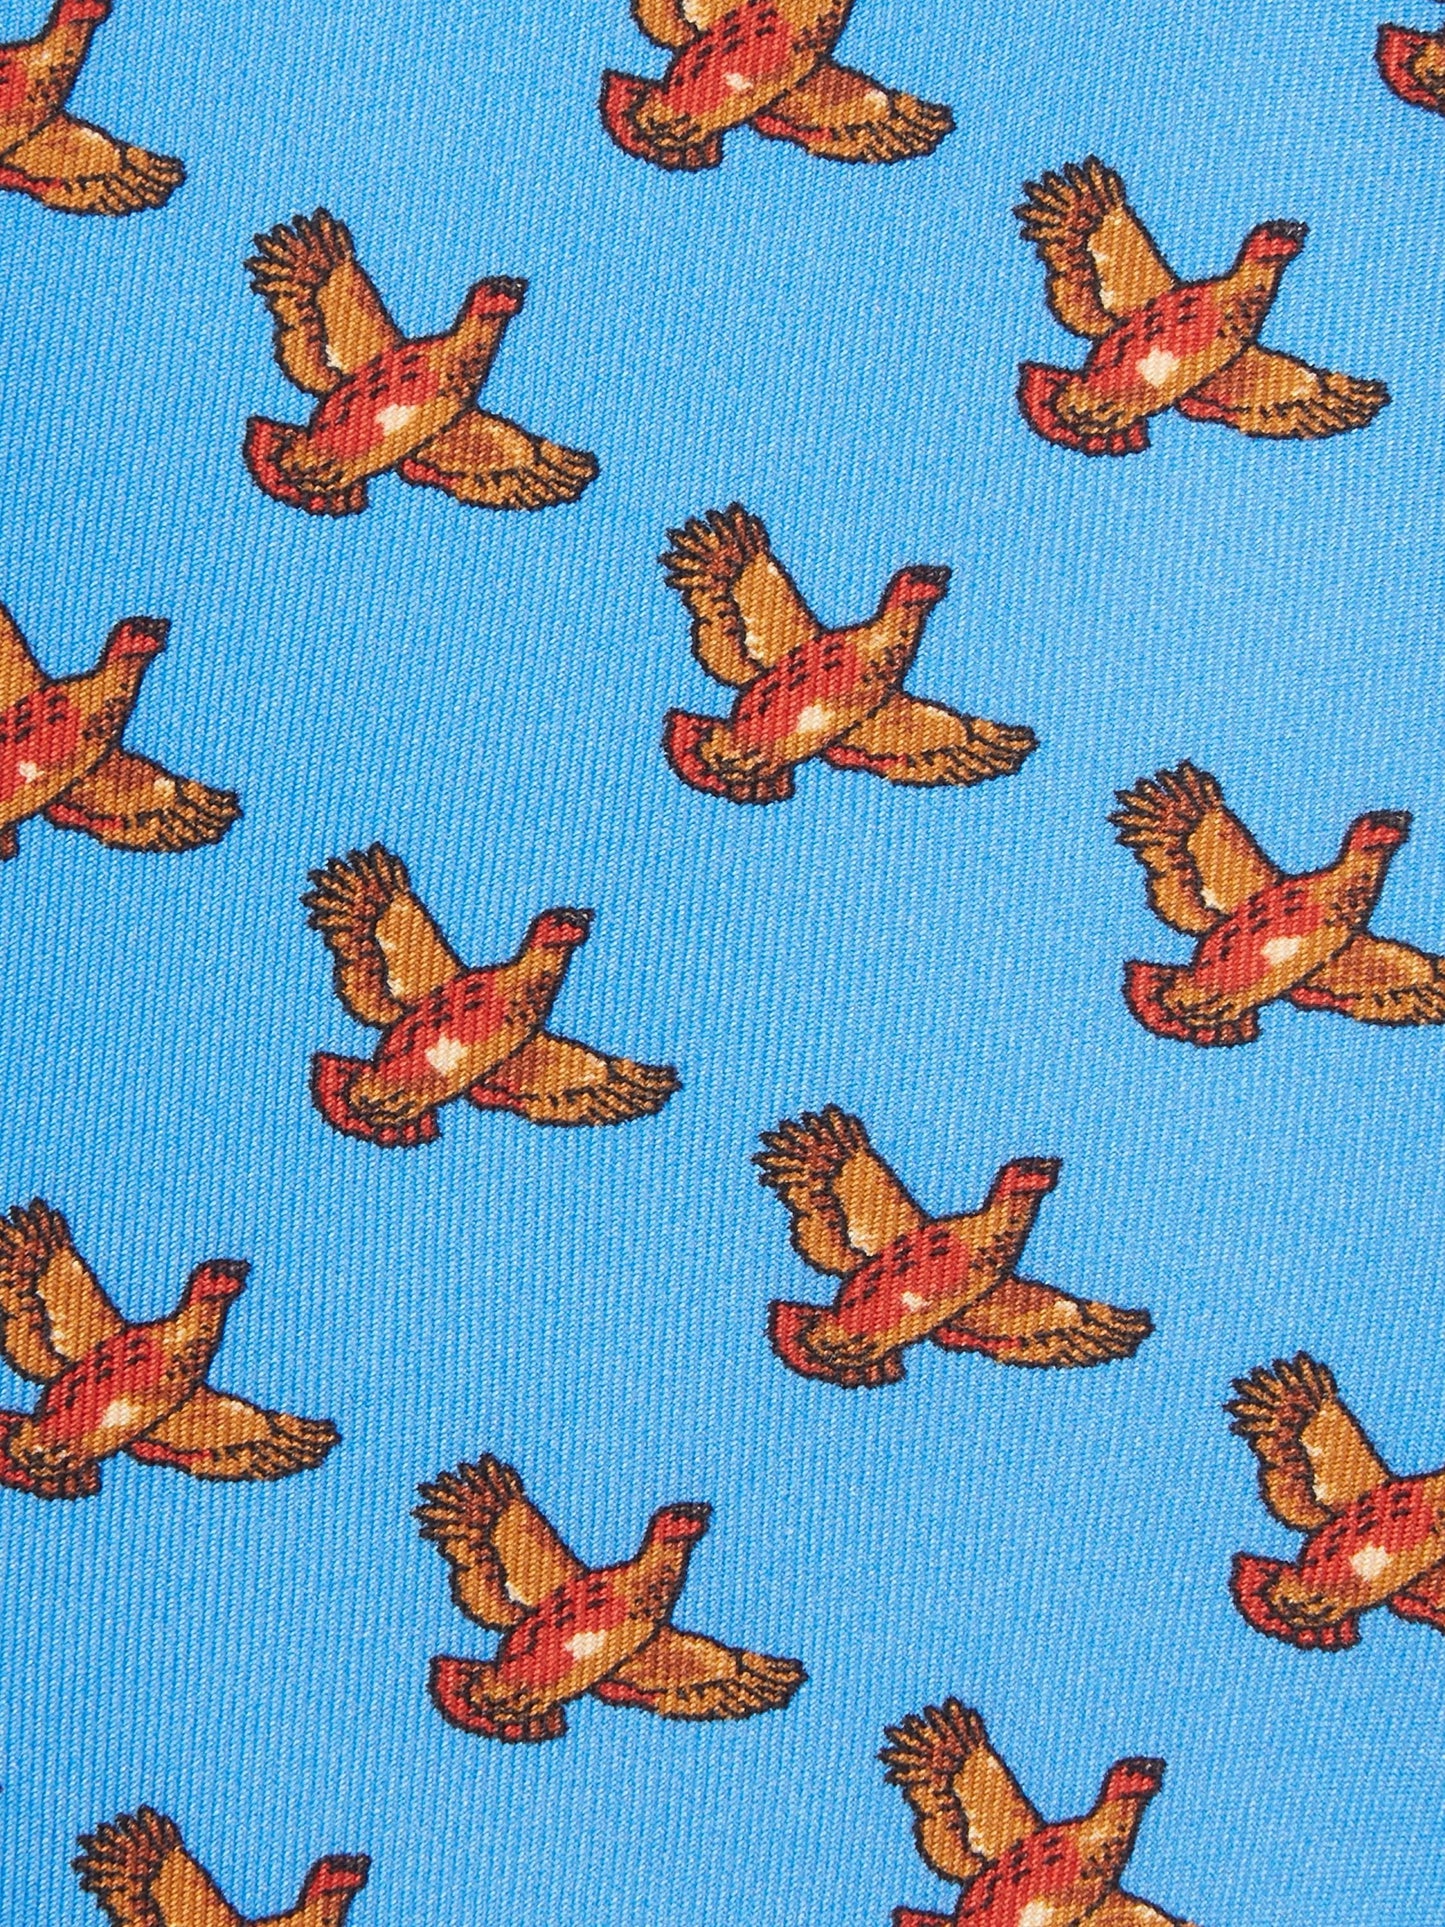 Pure Silk Flying Grouse Tie - Blue